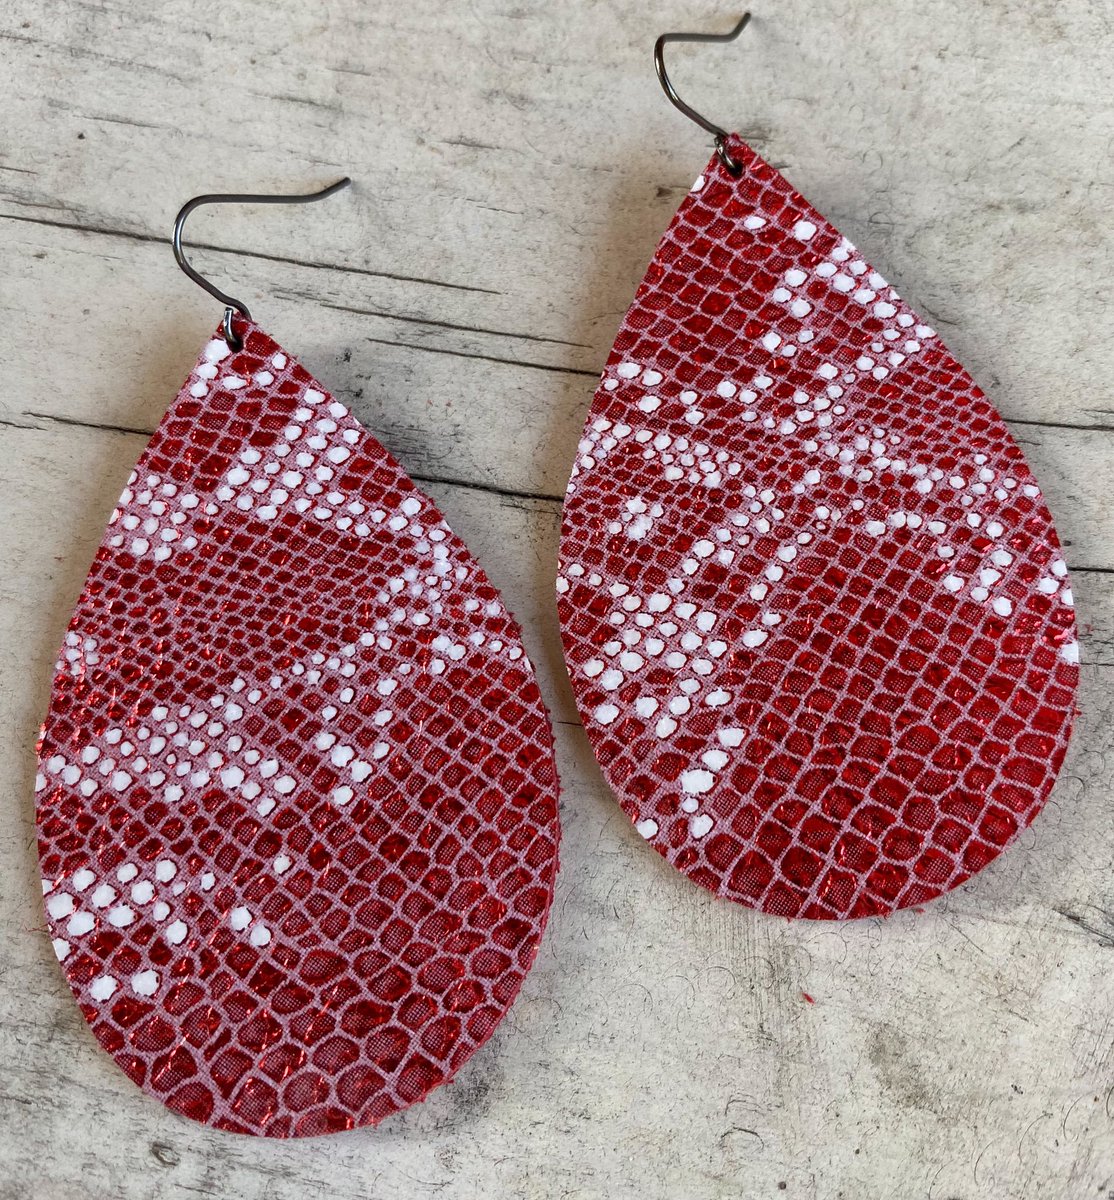 Perfect holiday leather earrings ❤️ #leather #holidays #christmas #supportsmalbusinesses #supportyourfriends